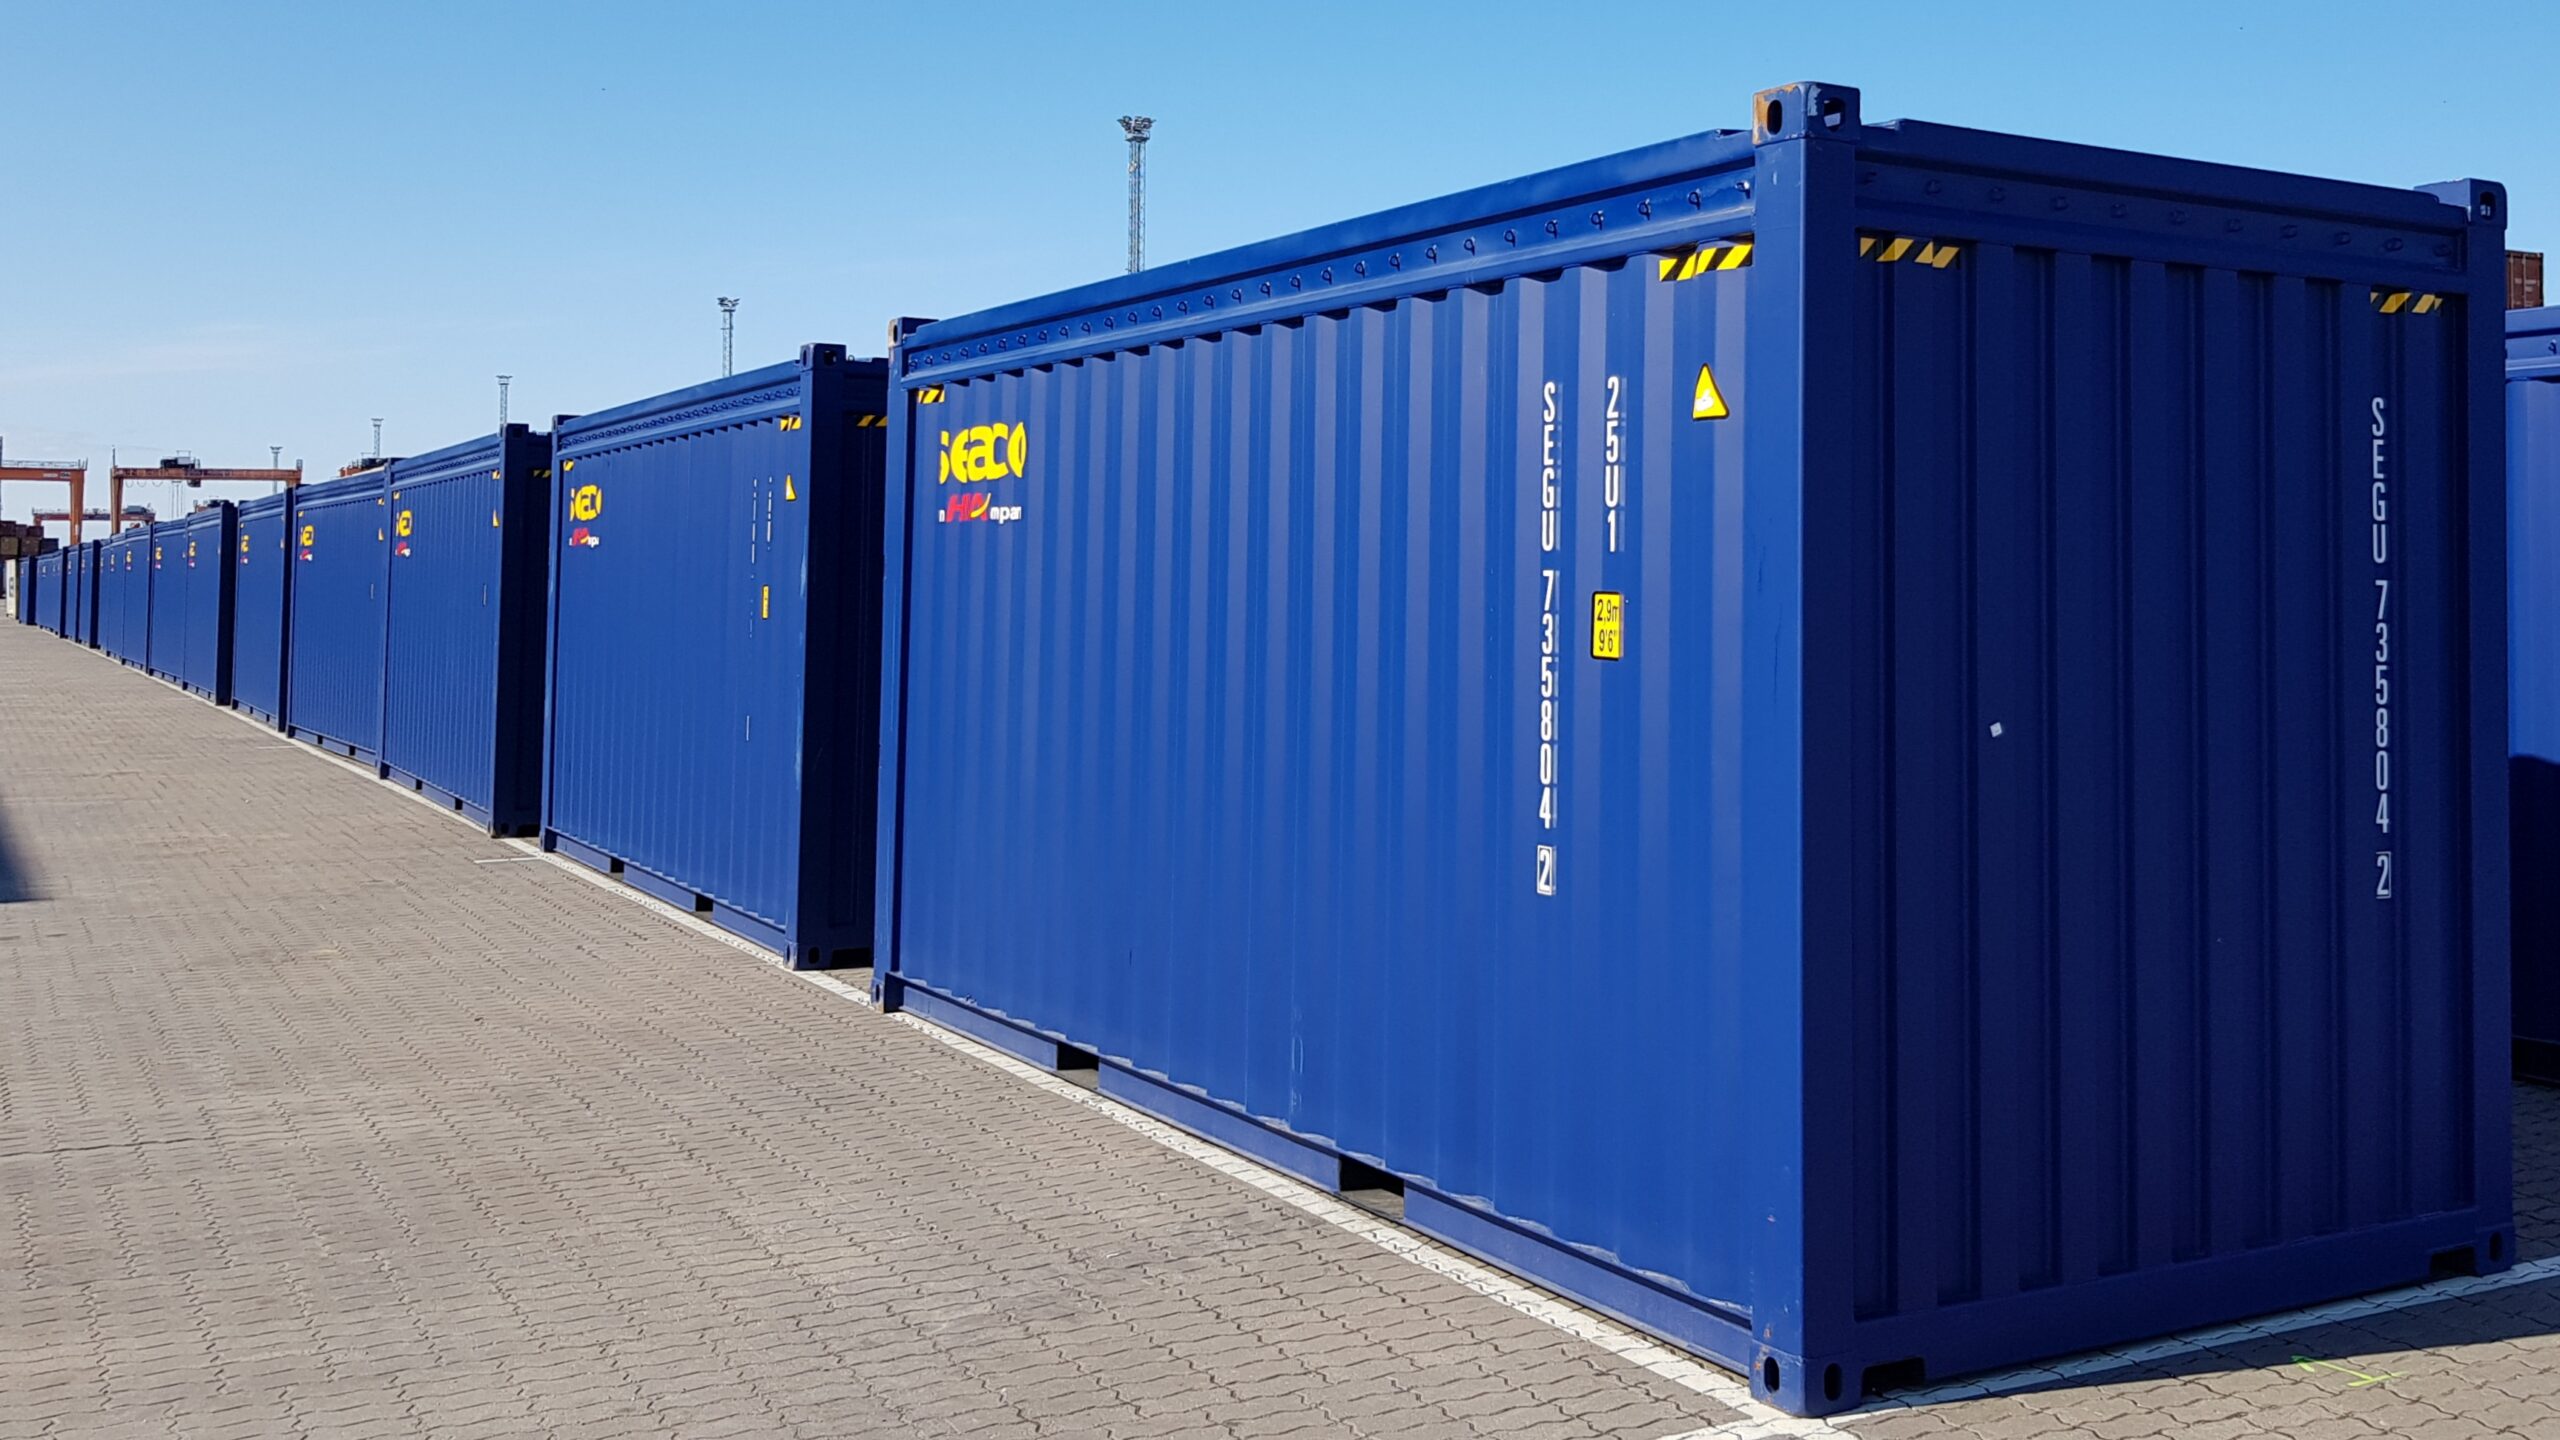 Operail’s new containers will significantly increase the volume of multimodal freight transport